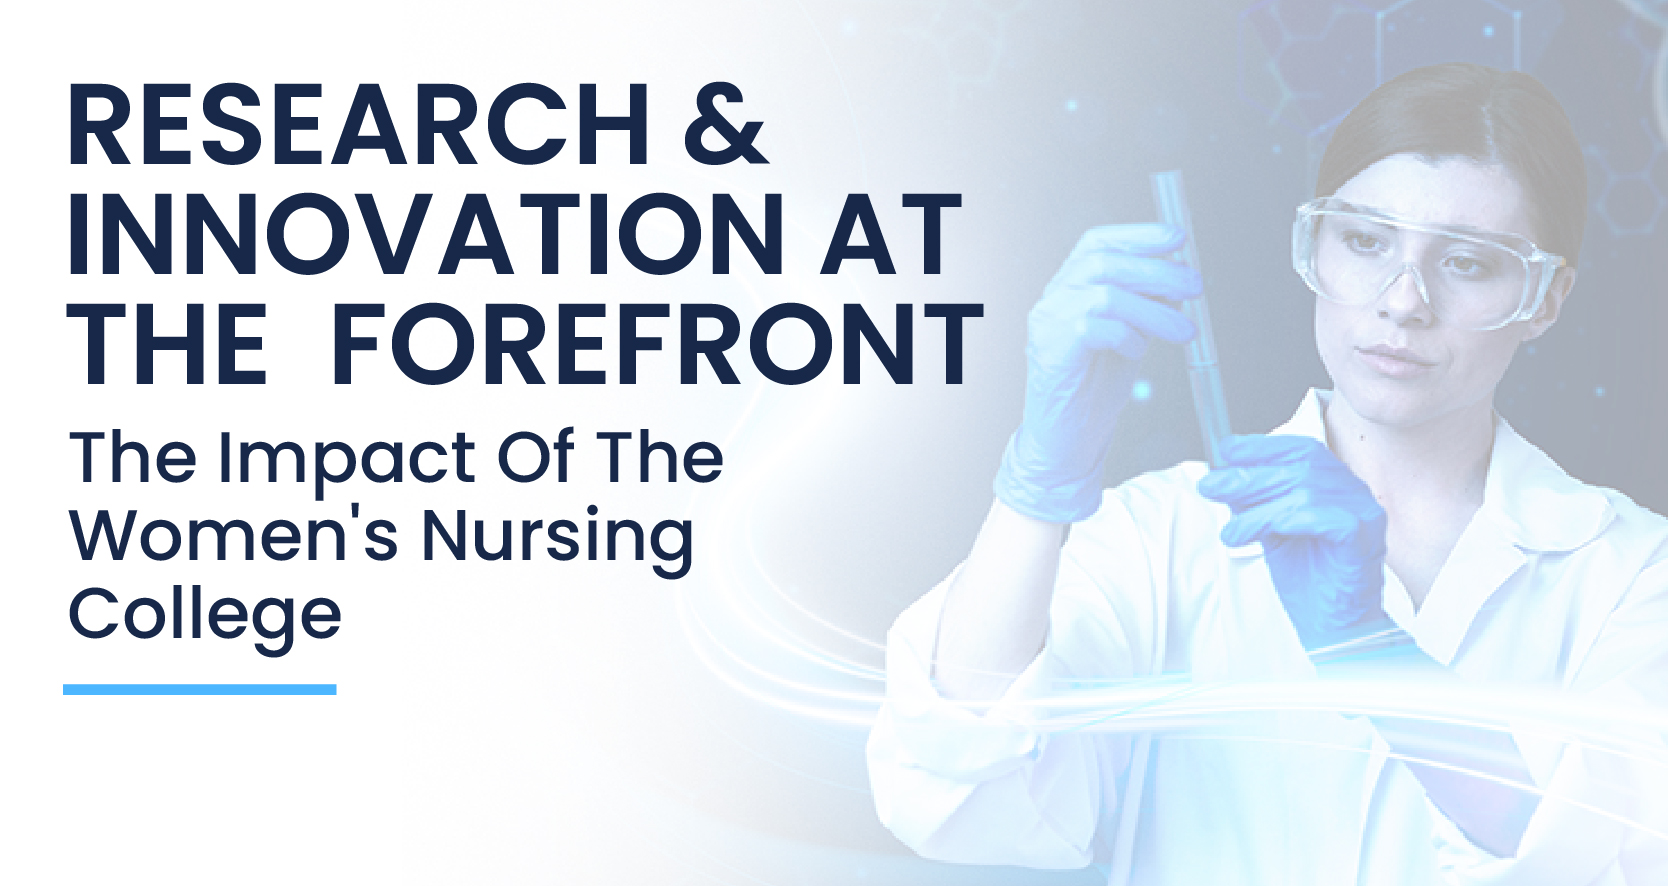 Research and Innovation at the Forefront: The Impact of the Women’s Nursing College